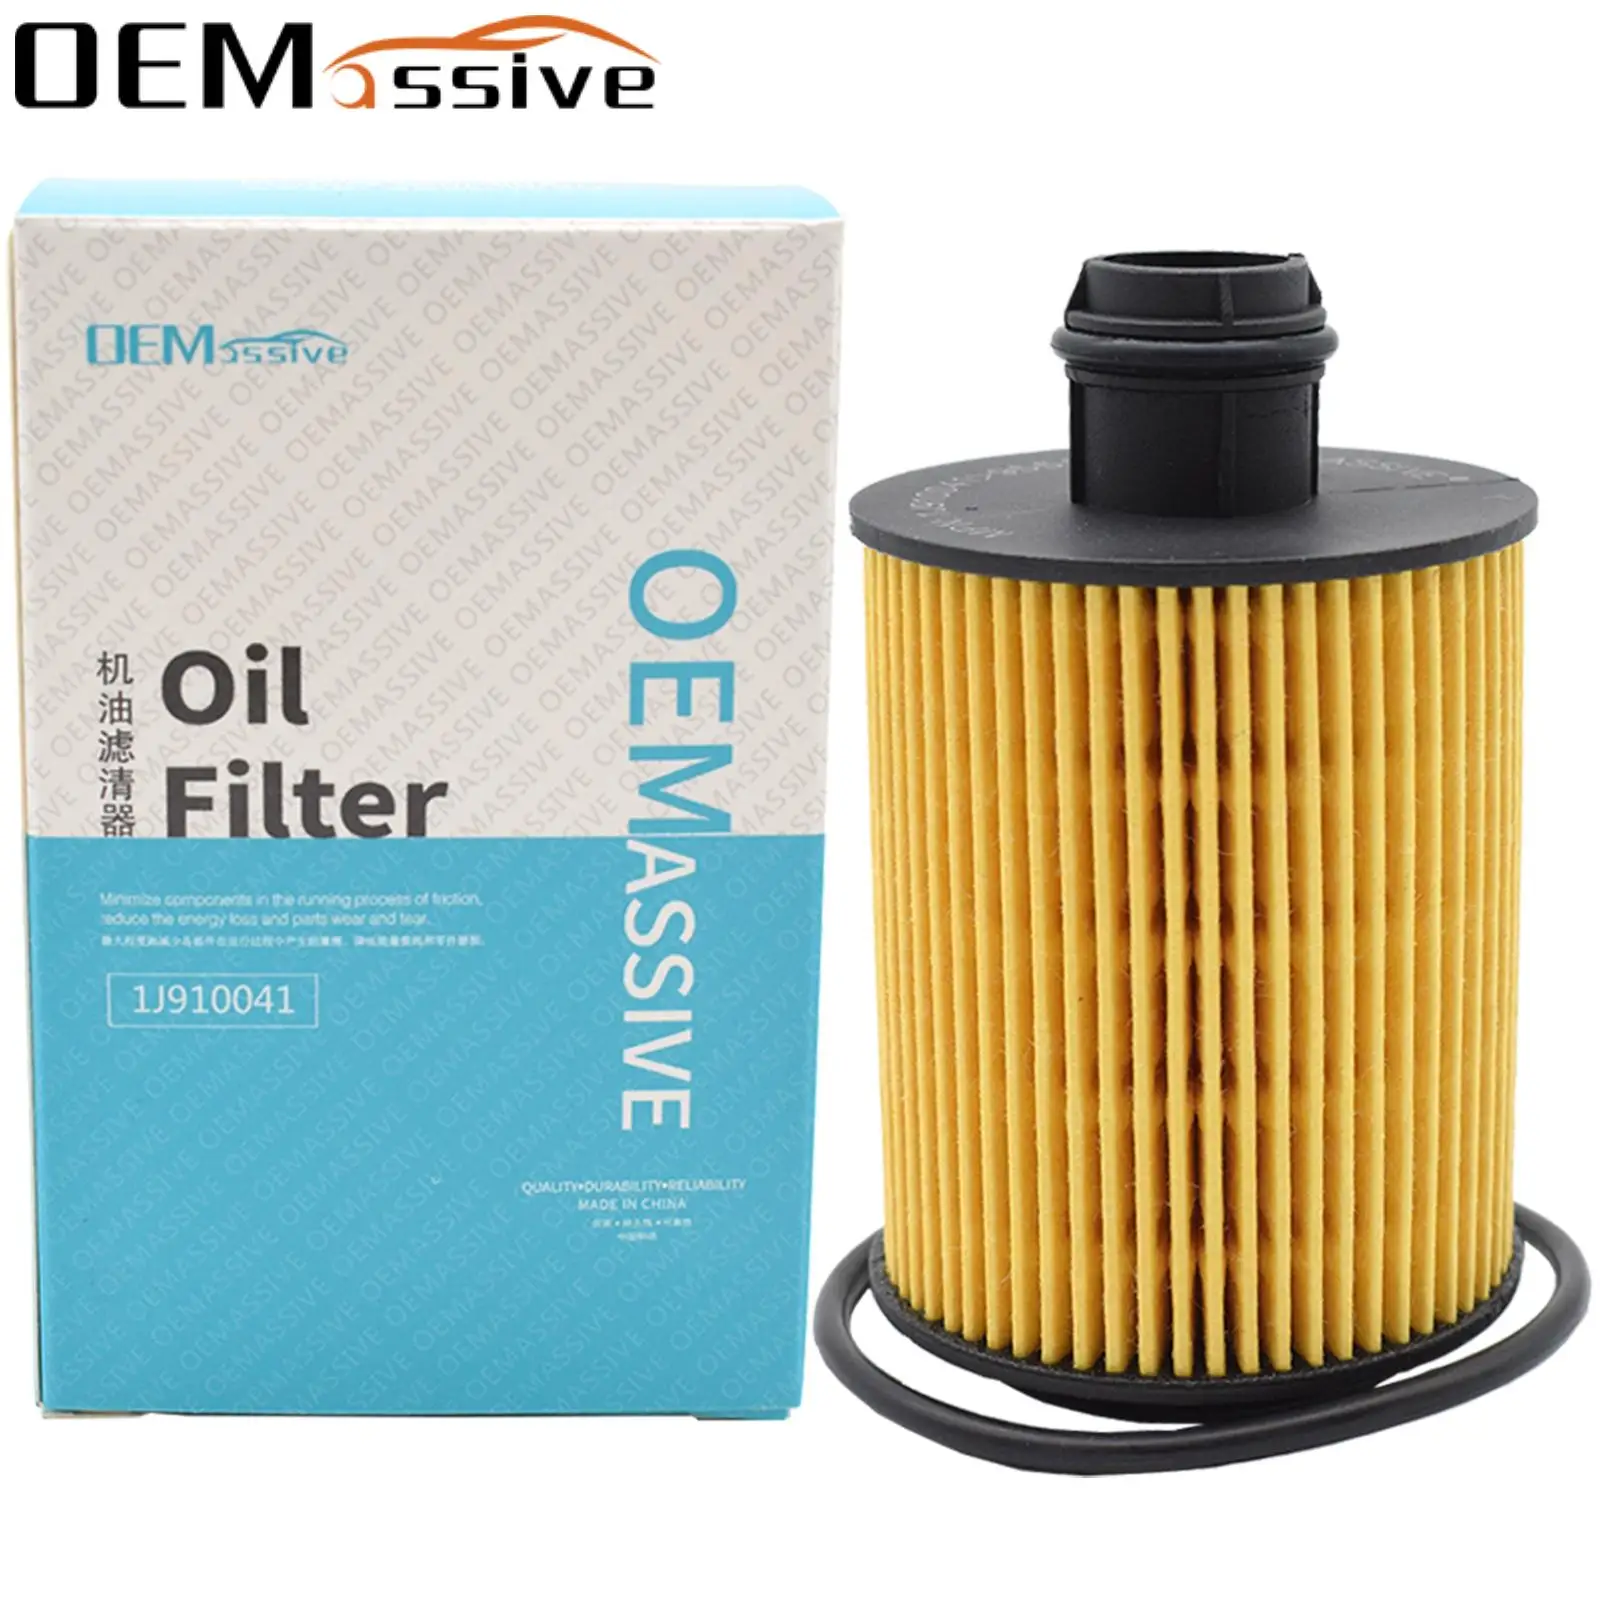 OEM Oil Filter Engine Filtration Replacement For Opel Corsa D 2006-2016 